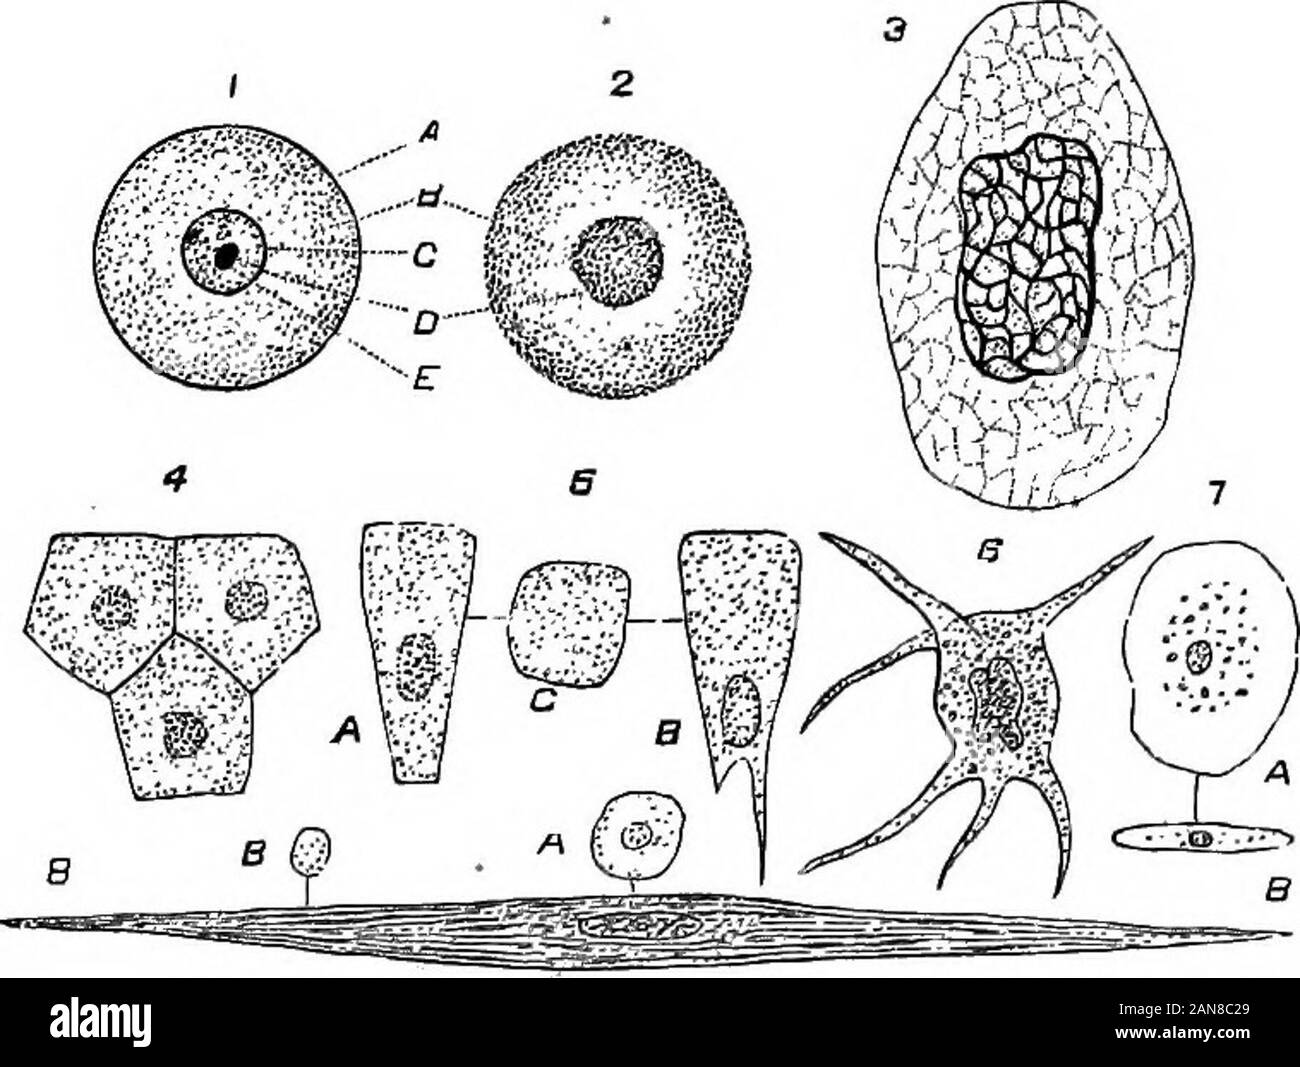 An illustrated encyclopædic medical dictionaryBeing a dictionary of the technical terms used by writers on medicine and the collateral sciences, in the Latin, English, French and German languages . l cavities in the mas-toid and other bones, the alveoli of the lungs, the cleft-like spaces orareolsB of connective tissue, and, in botany, the cavity or loculus ofthe ovary, containing the ovules. (S), a cavity opening upon a freesurface, such as the crypts in the stomach of the camel and otherruminants, the cavities in the nests of wasps and bees, the depres-sion or loculus in the anther, which co Stock Photo